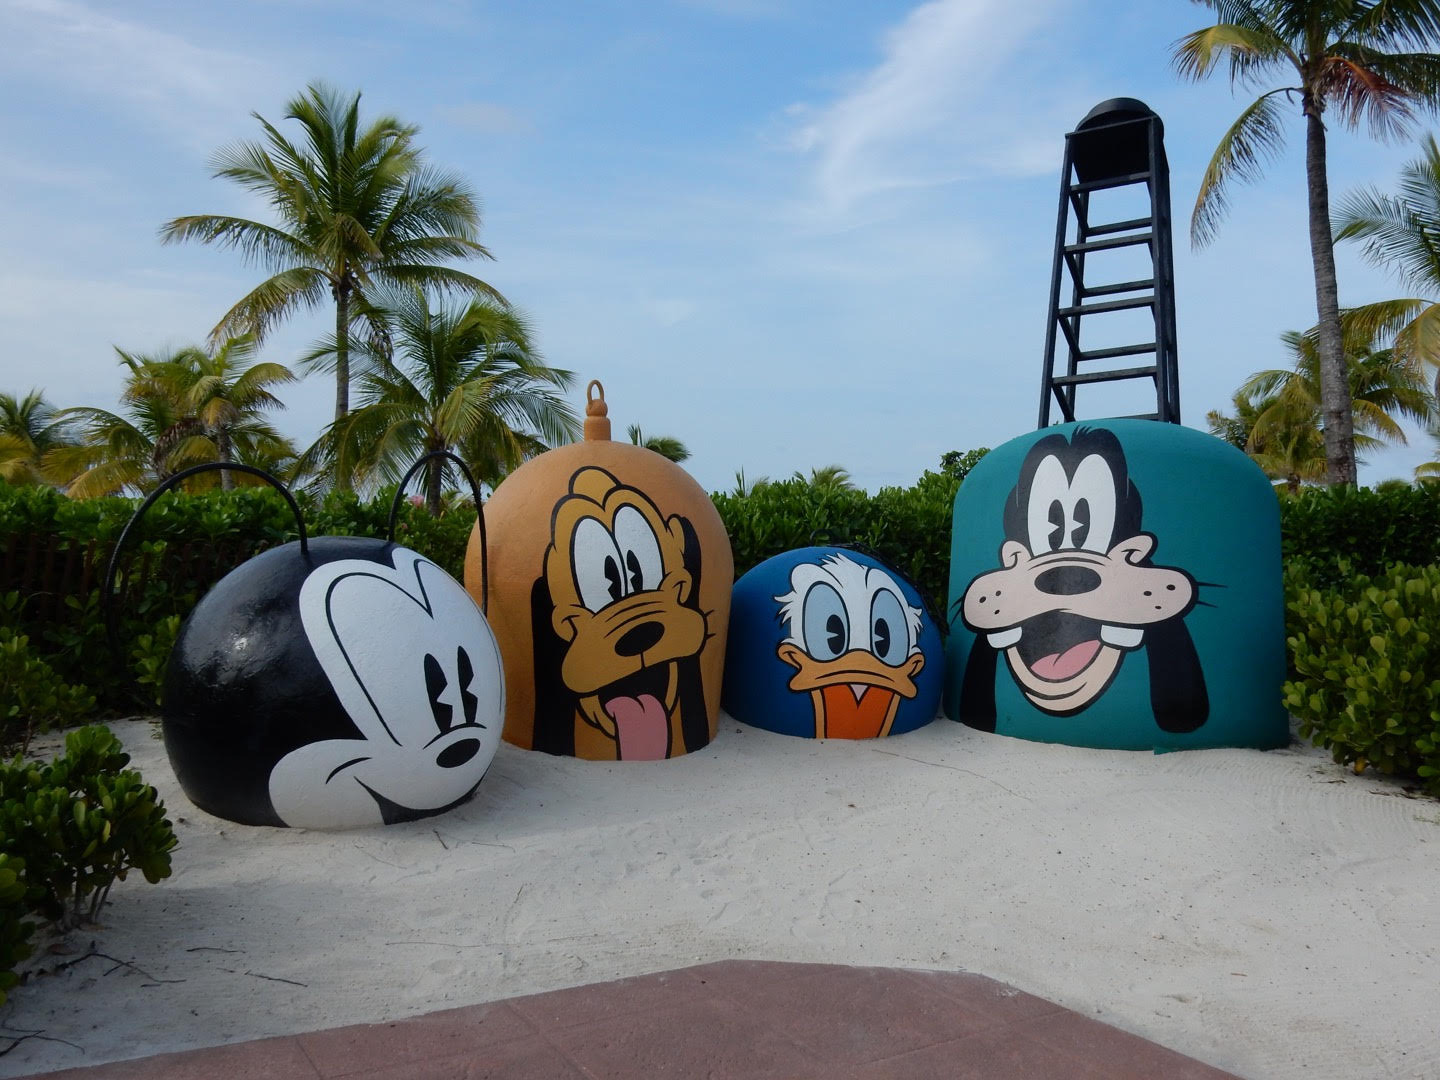 Personnages Castaway Cay